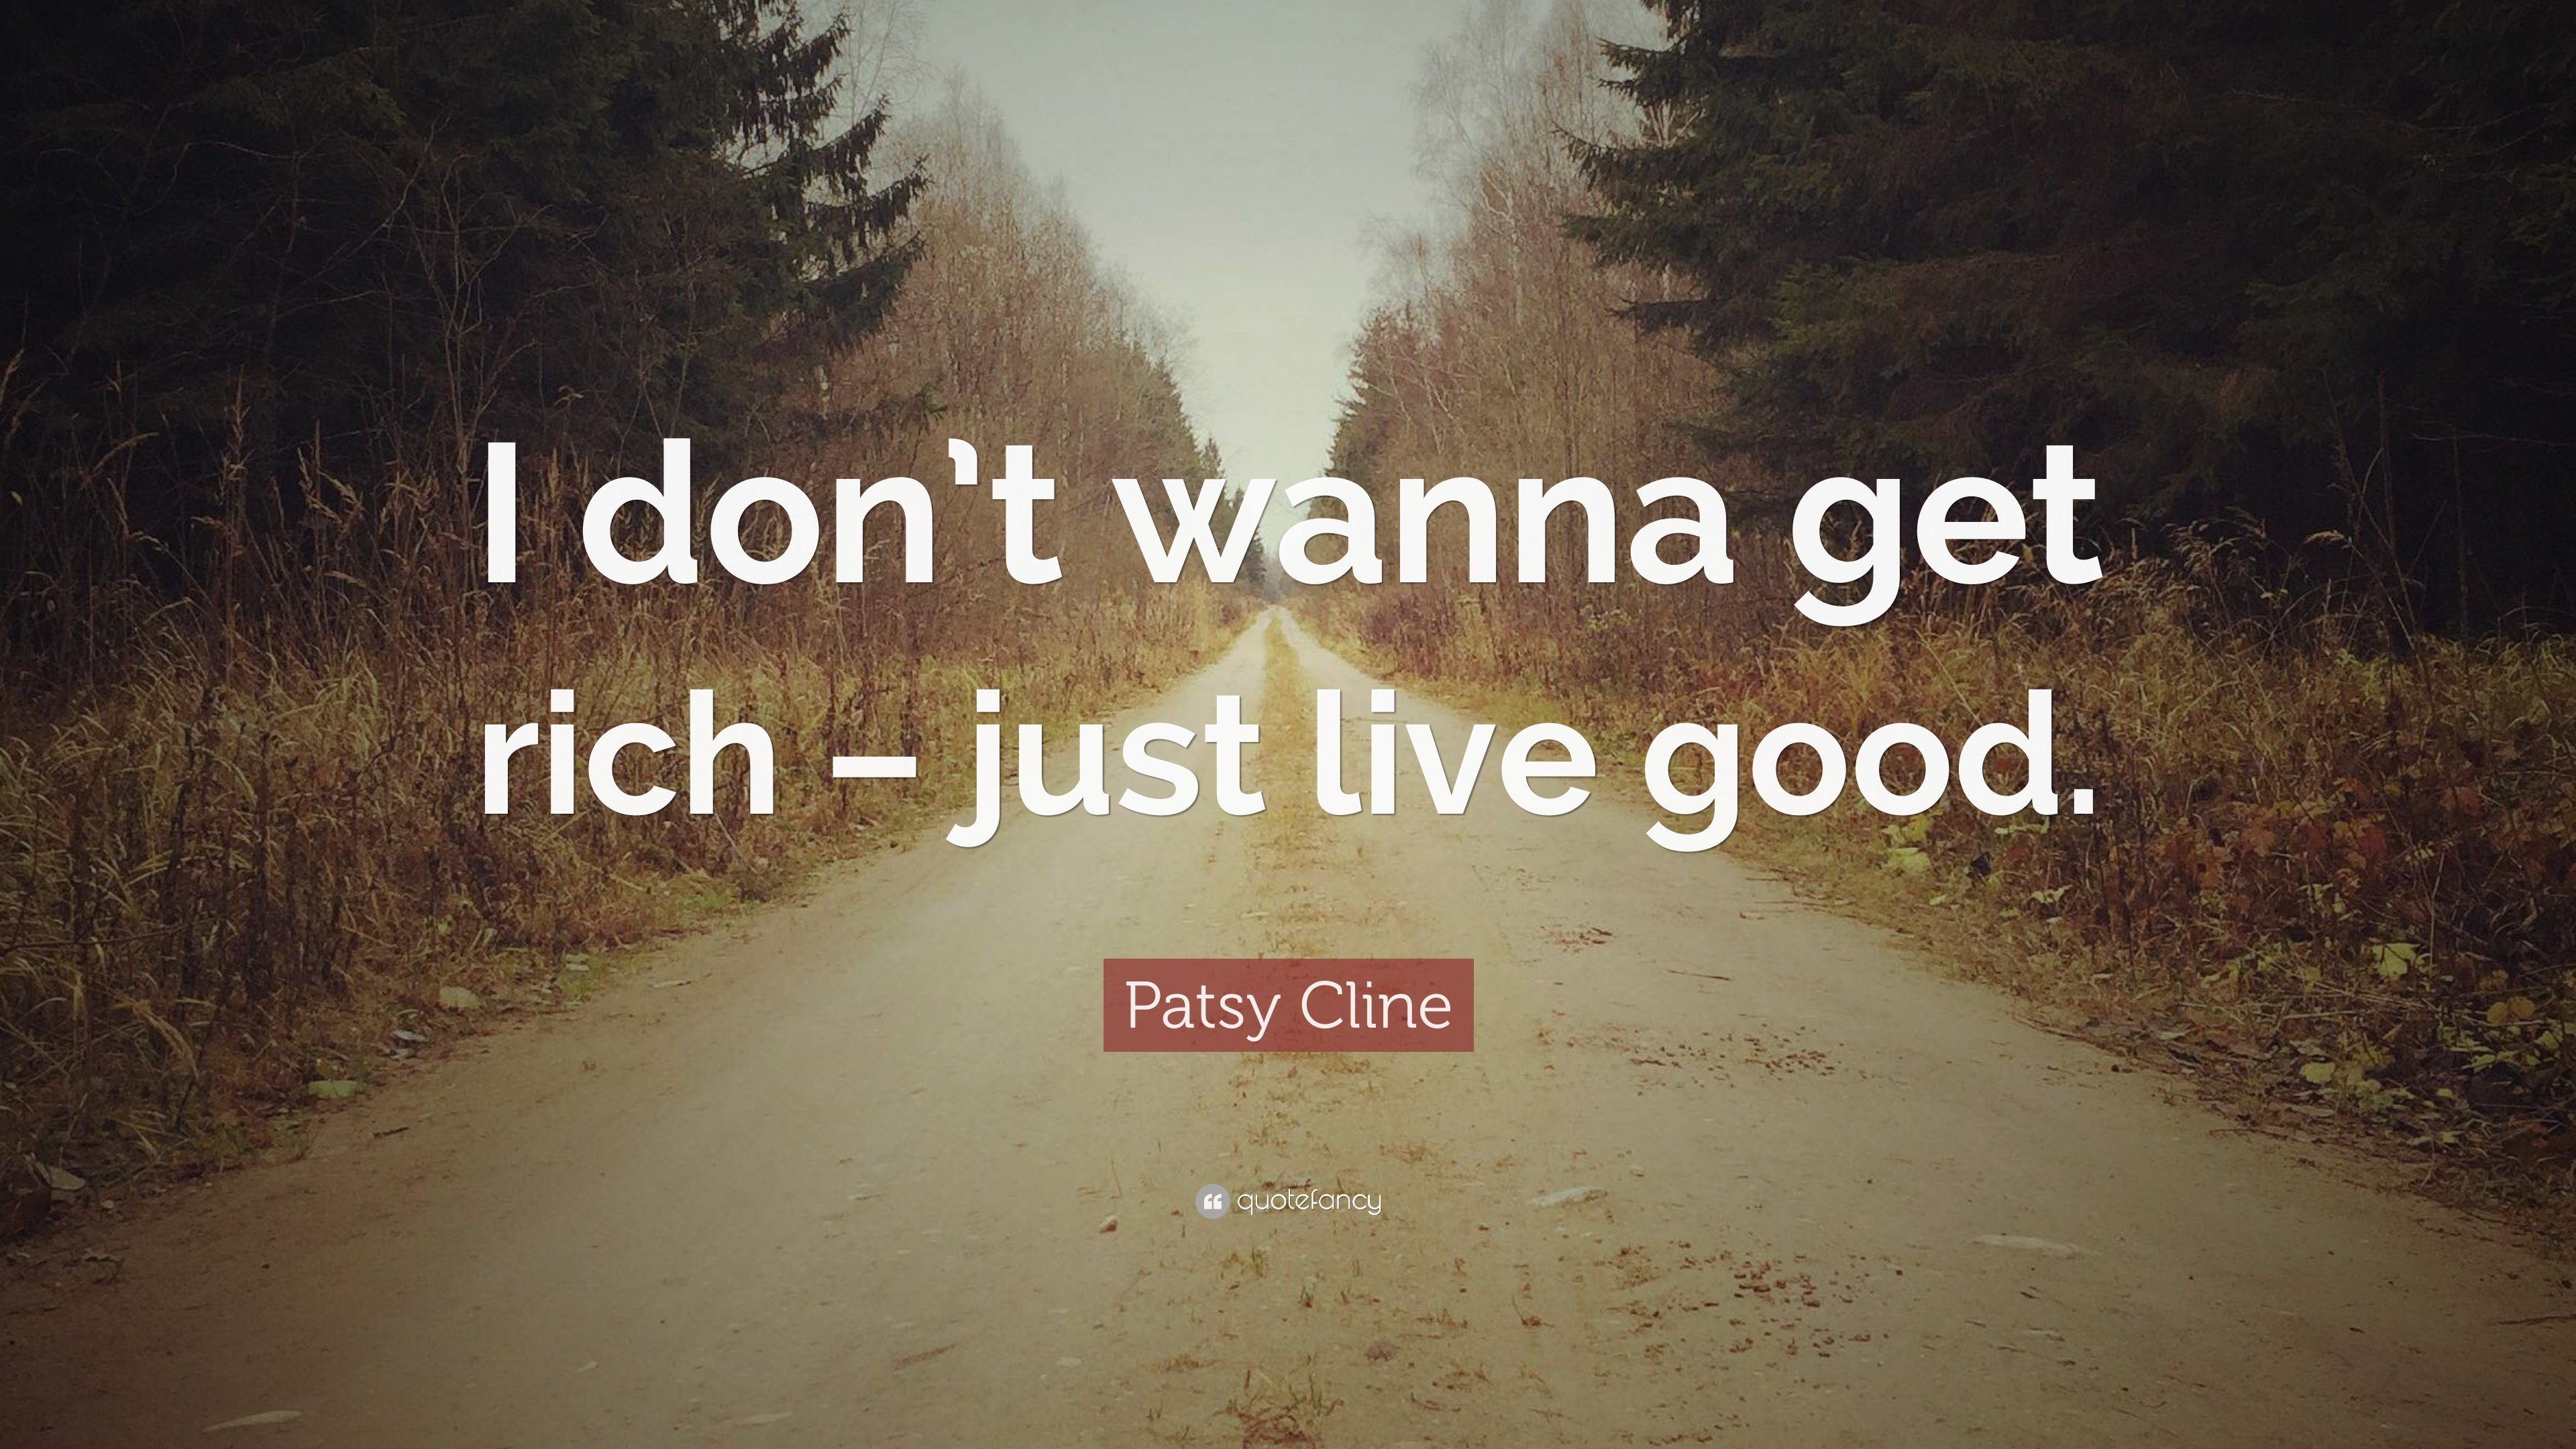 Patsy Cline Quote: “I don't wanna get rich